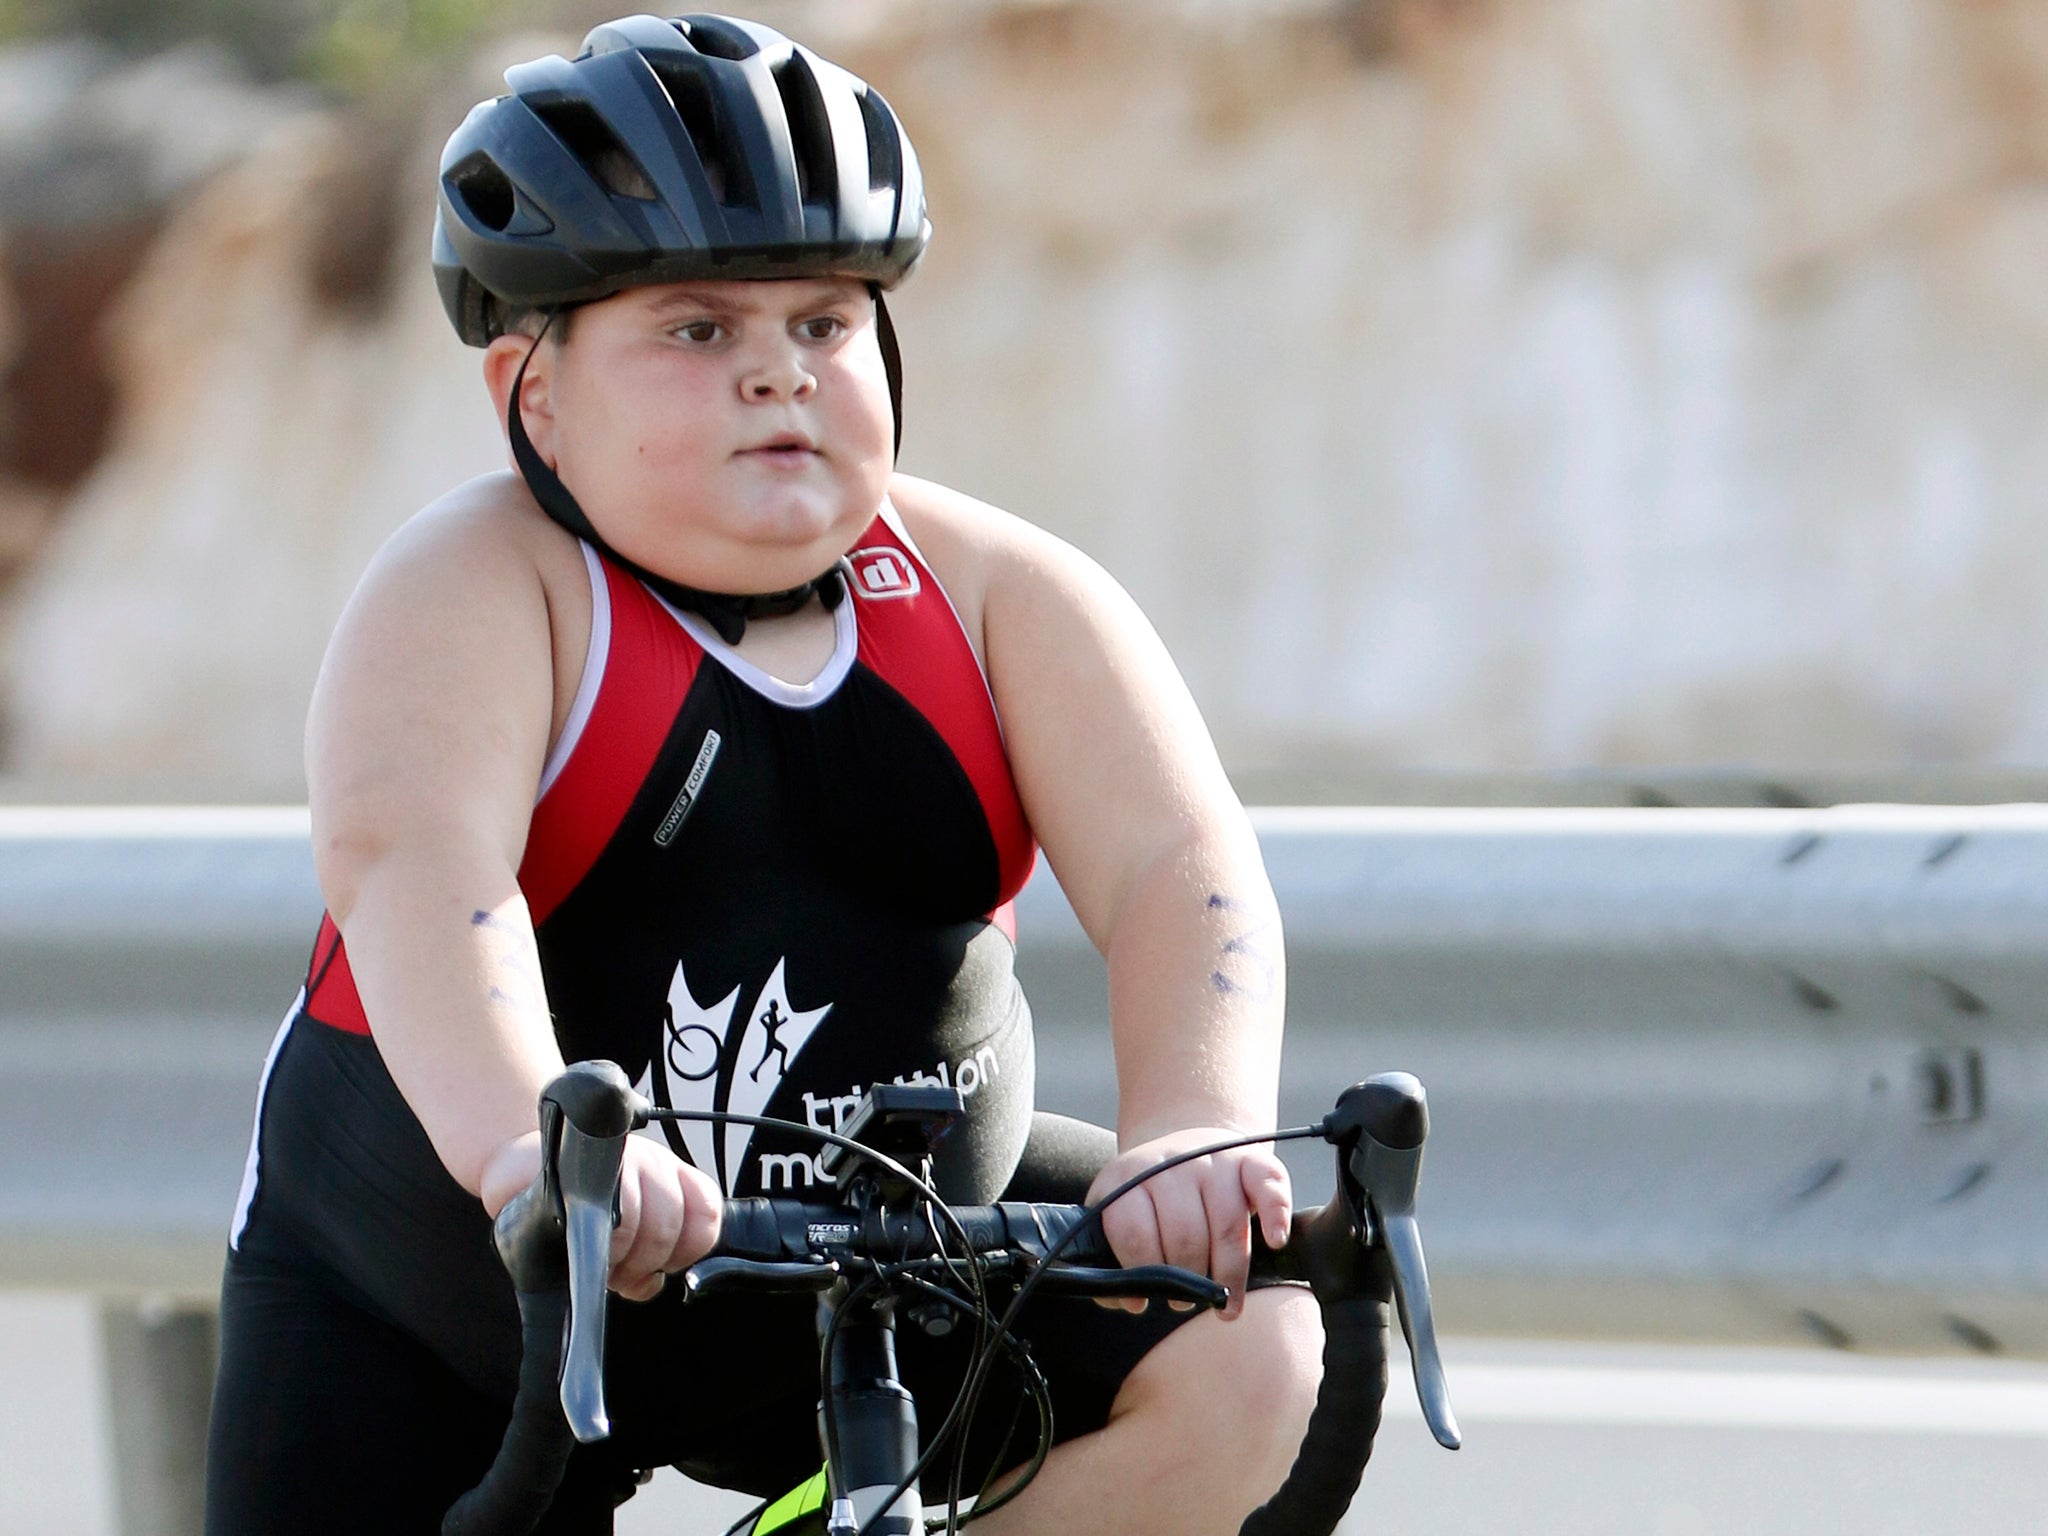 Jake Vella competing in the cycling section of a triathlon in Malta